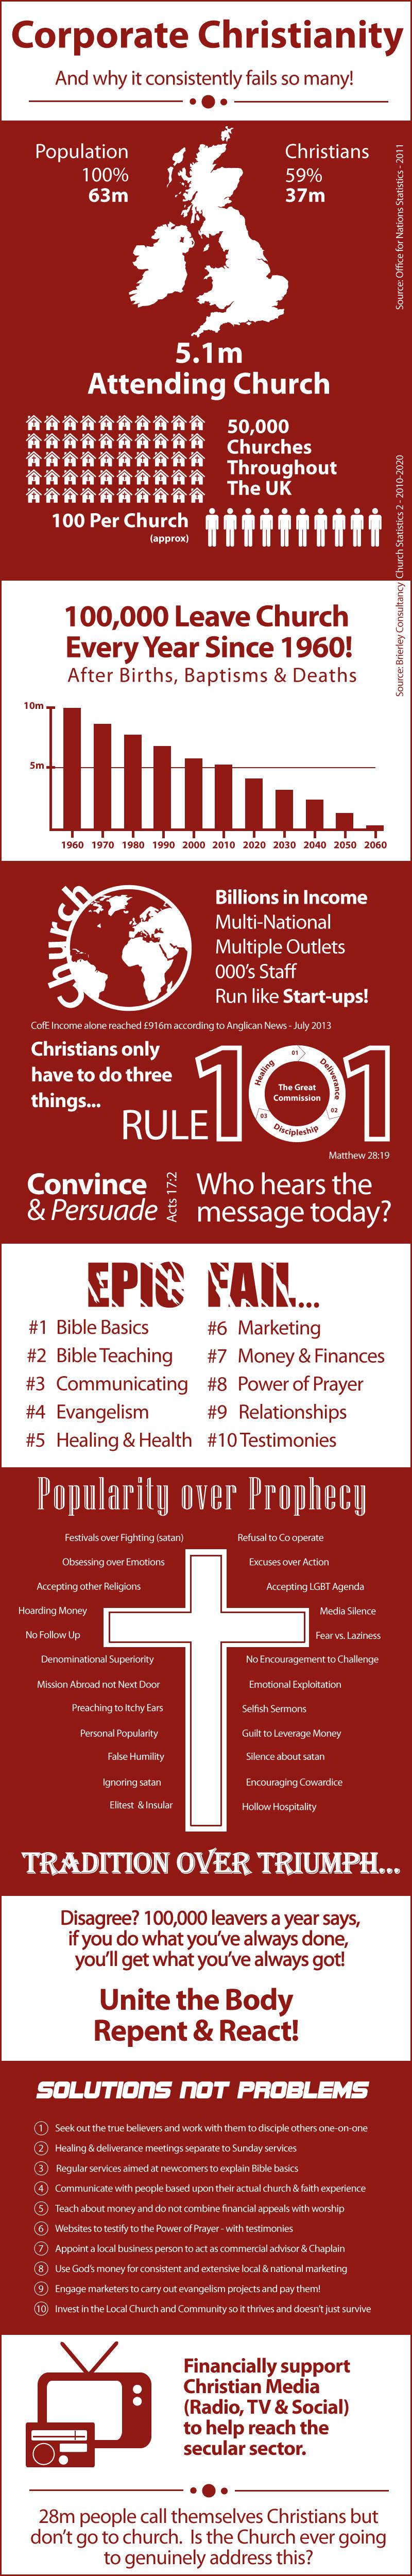 Corporate Christianity Infographic